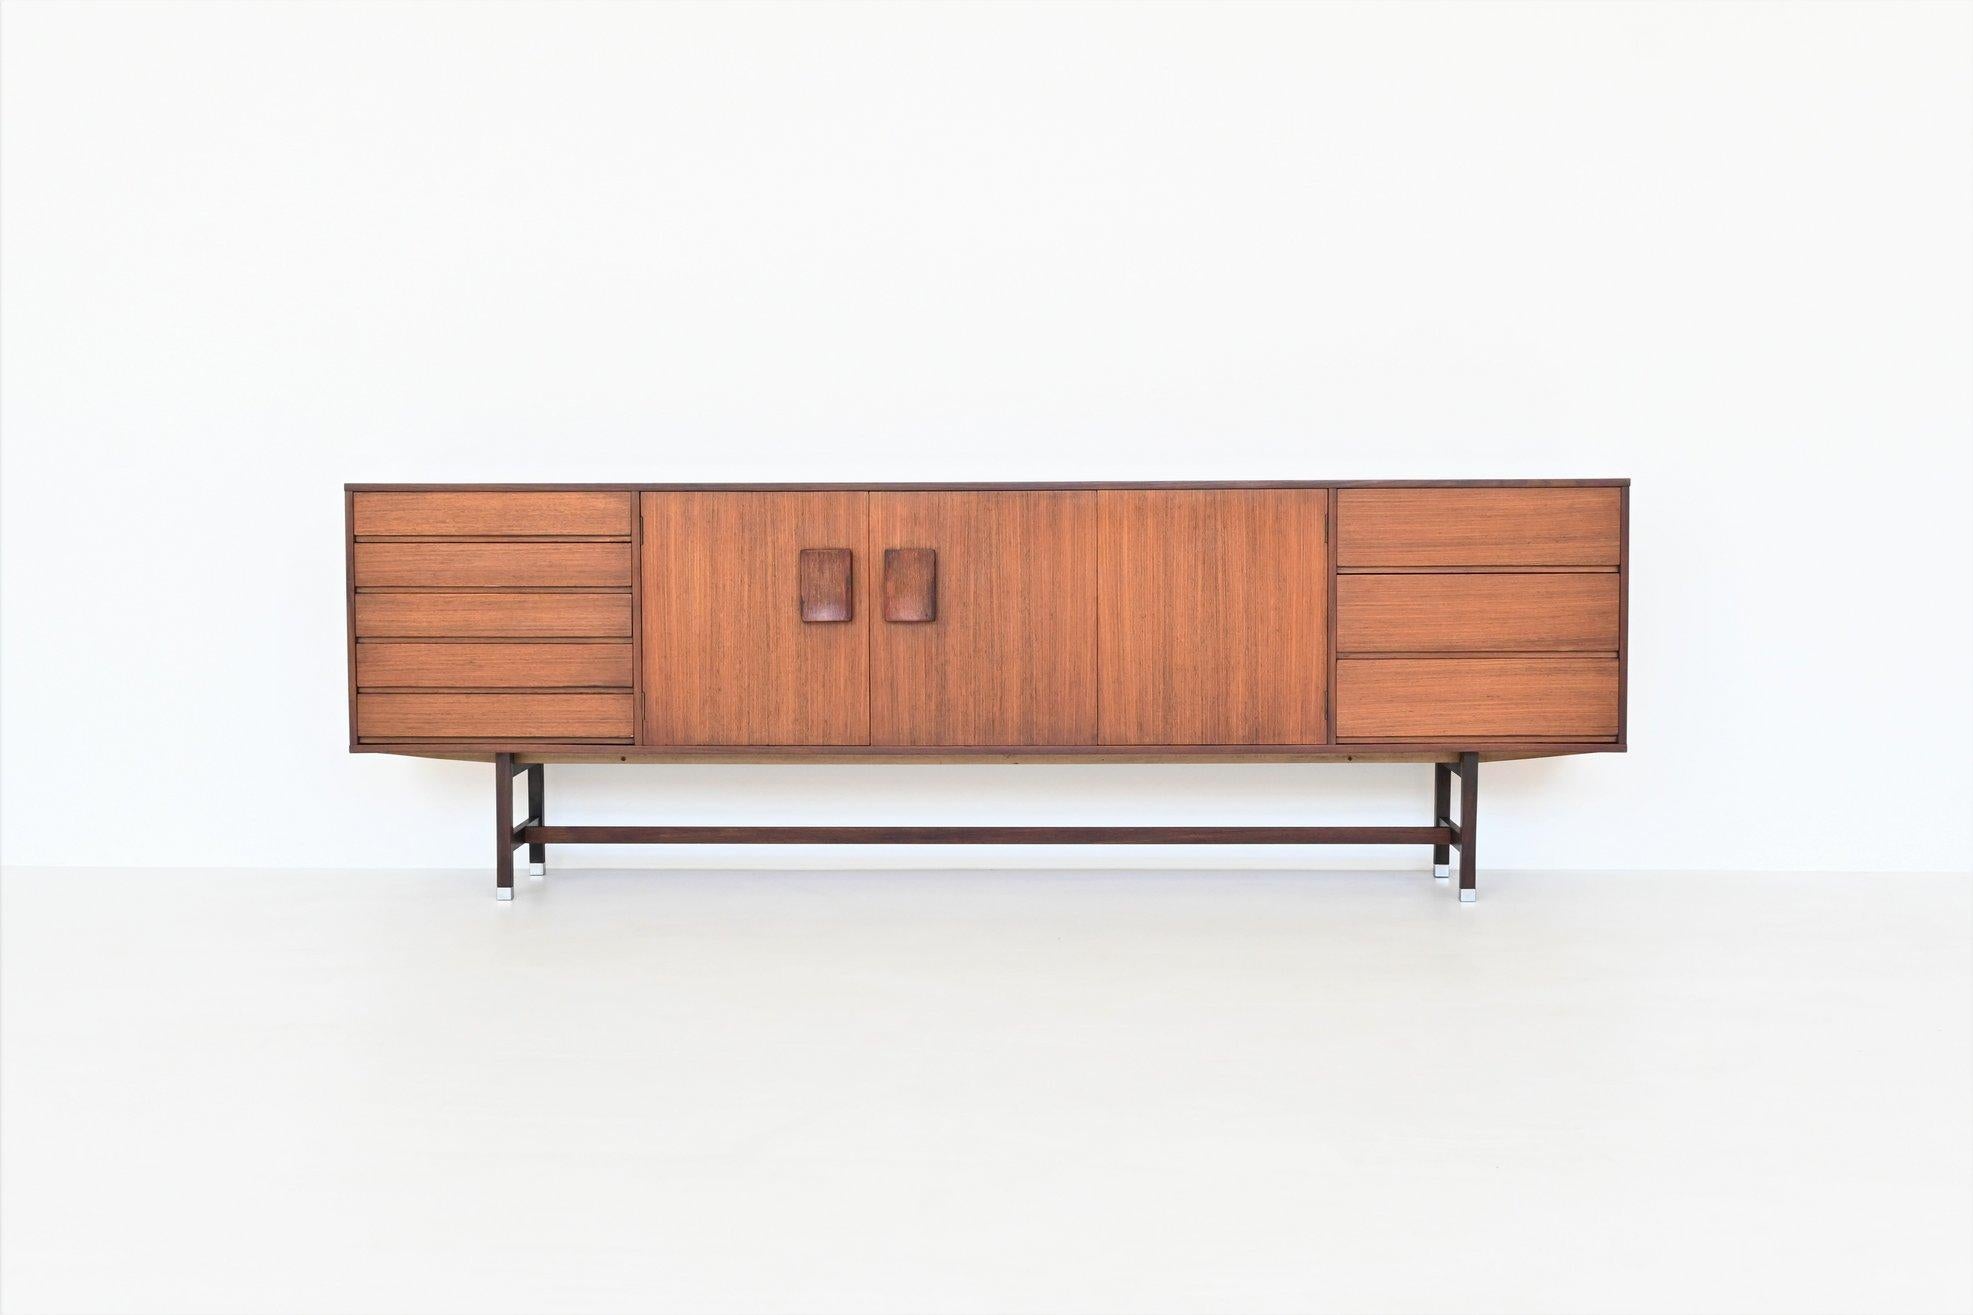 Beautiful sleek shaped sideboard designed by Inger Klingenberg for Fristho Franeker, The Netherlands 1960. This sideboard is made of nicely grained rosewood veneer supported by a solid rosewood frame with aluminium feet. It has three doors with